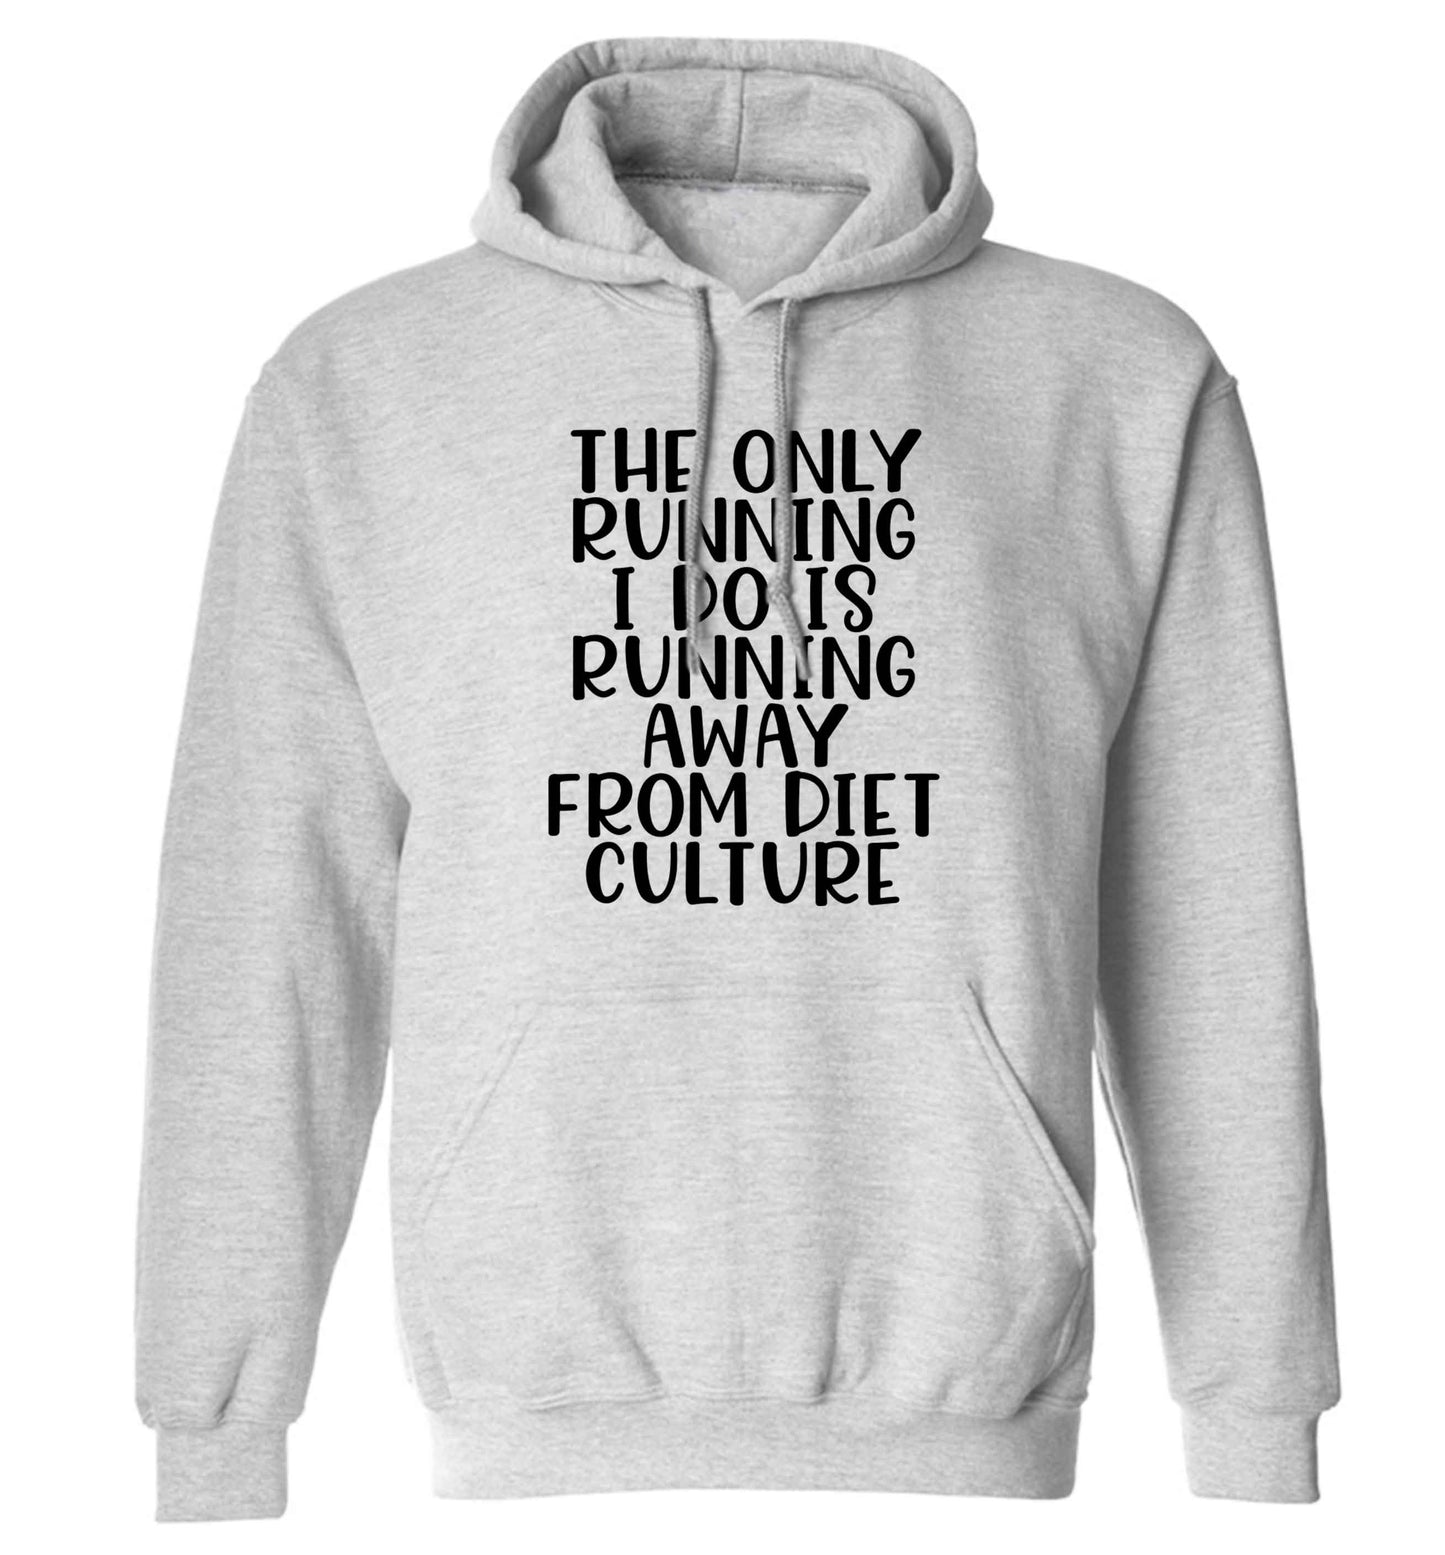 The only running I do is running away from diet culture adults unisex grey hoodie 2XL